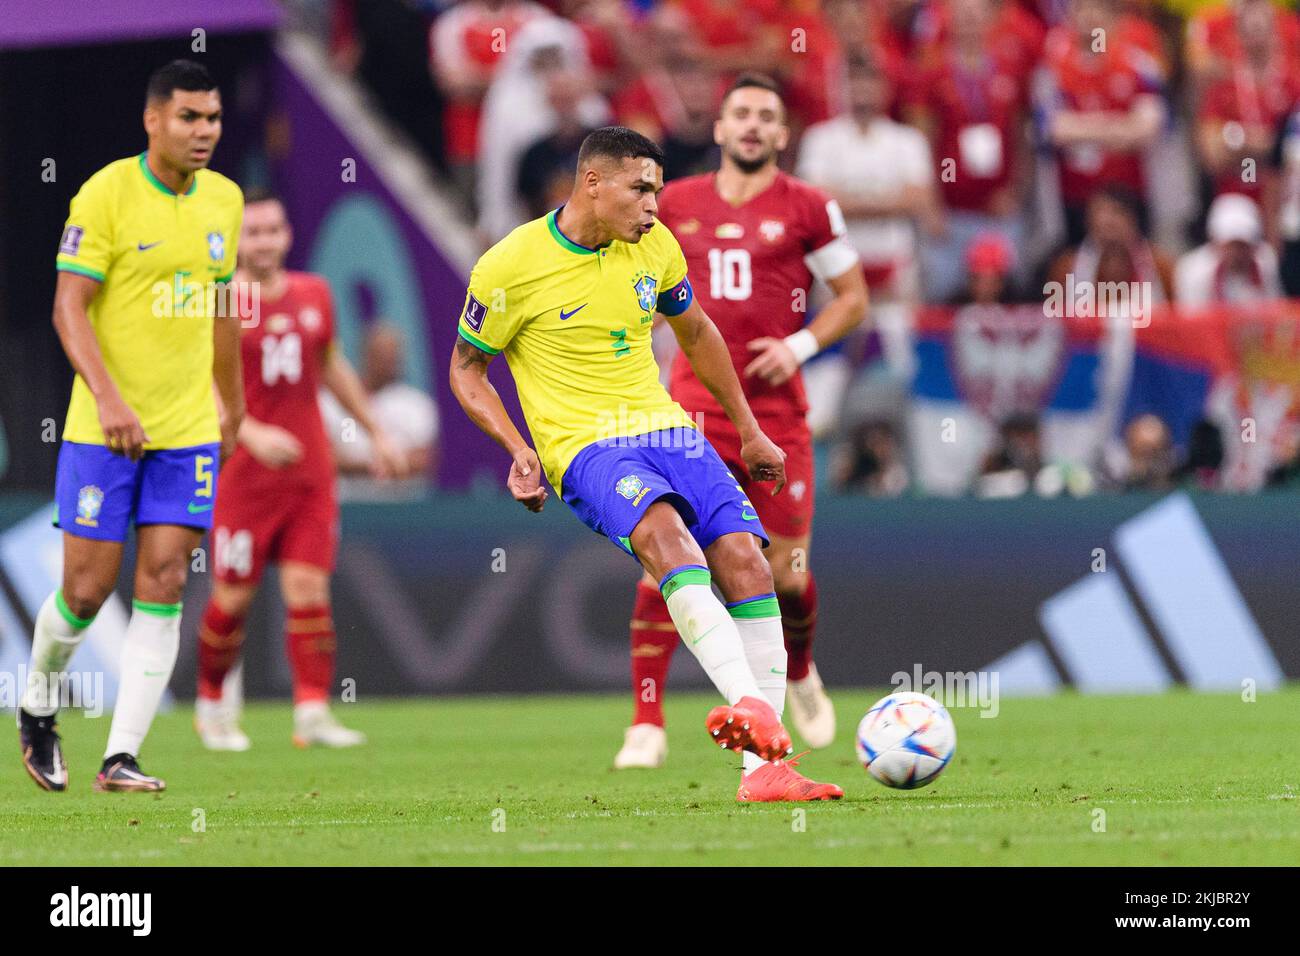 Lusail, Qatar. 24th Nov, 2022. Lusail, Qatar, Nov 25th 2022: Thiago Silva of Brazil during a match between Brazil vs Serbia, valid for the group stage of the World Cup, held at the Lusail National Stadium in Lusail, Qatar. (Marcio Machado/SPP) Credit: SPP Sport Press Photo. /Alamy Live News Stock Photo